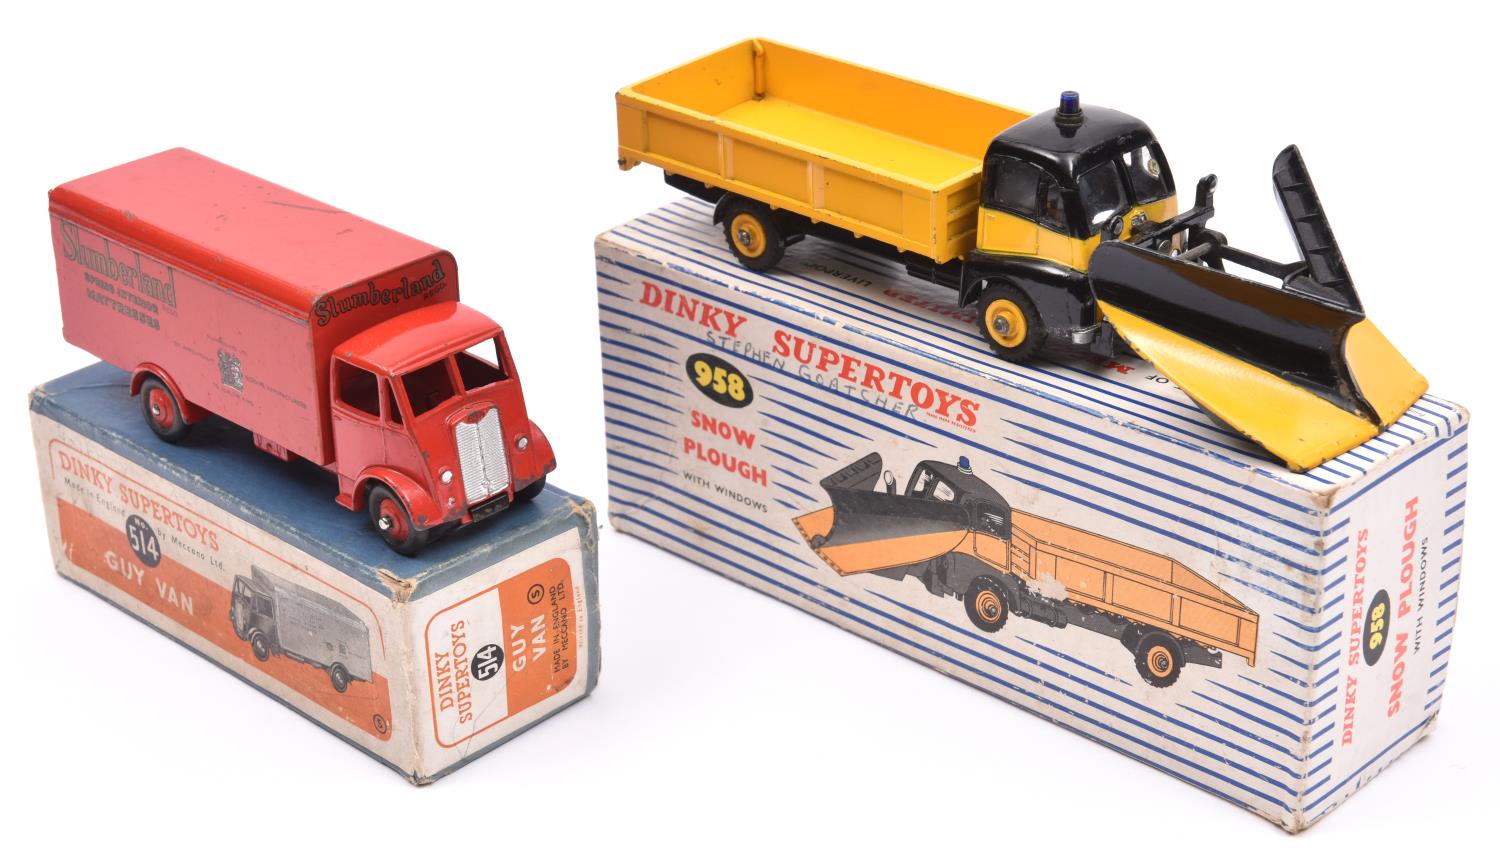 2 Dinky Supertoys. Guy Van (514). In 'Slumberland' red livery with red wheels. Together with Snow